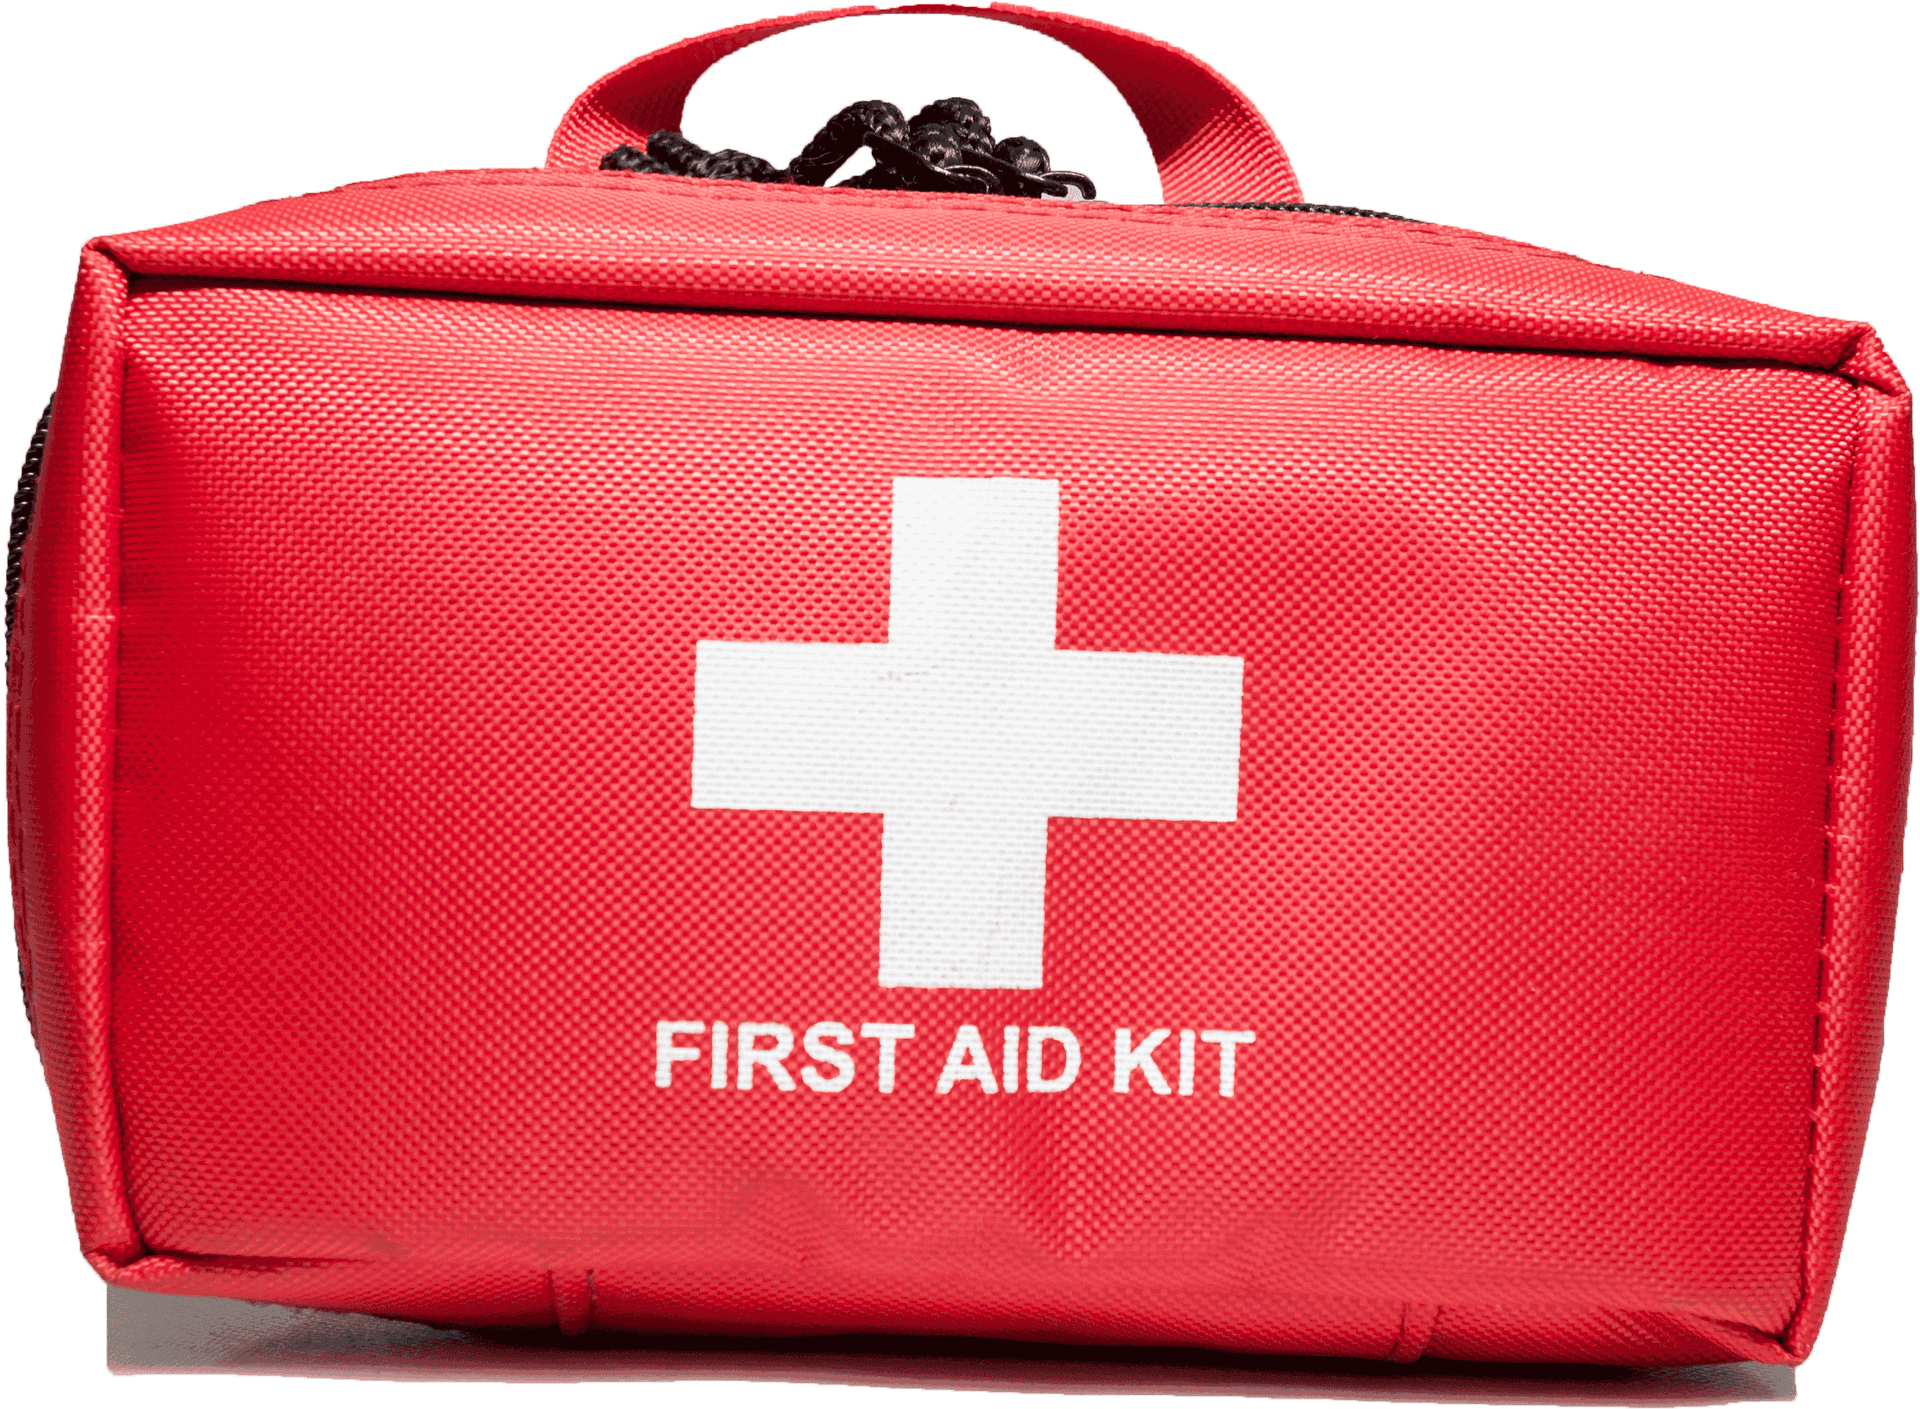 Red First Aid Kit Bag PNG